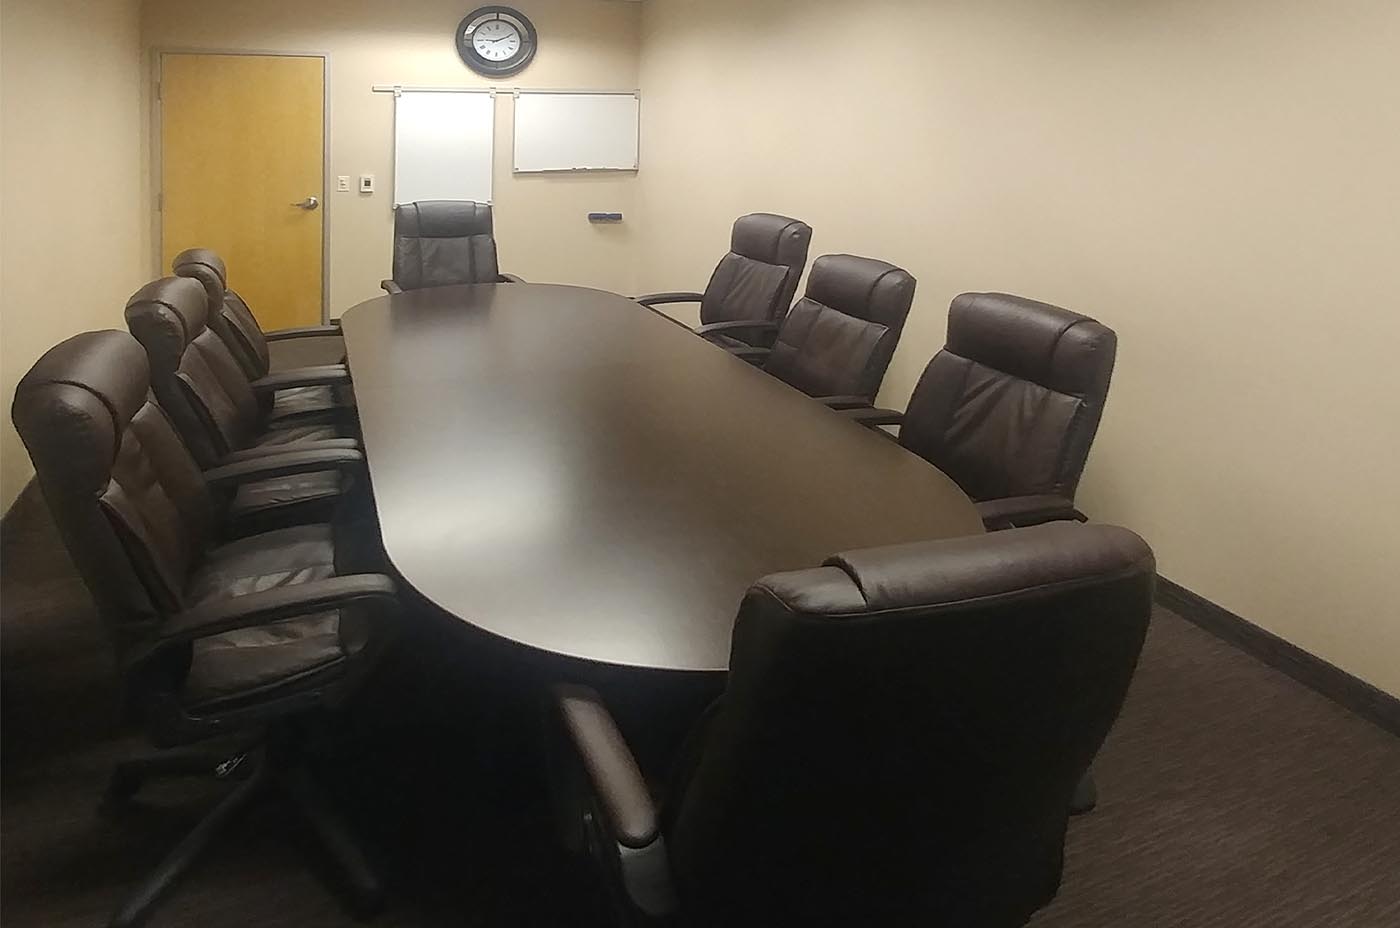 Union Hills Deer Valley Board Room Rental by the Hour